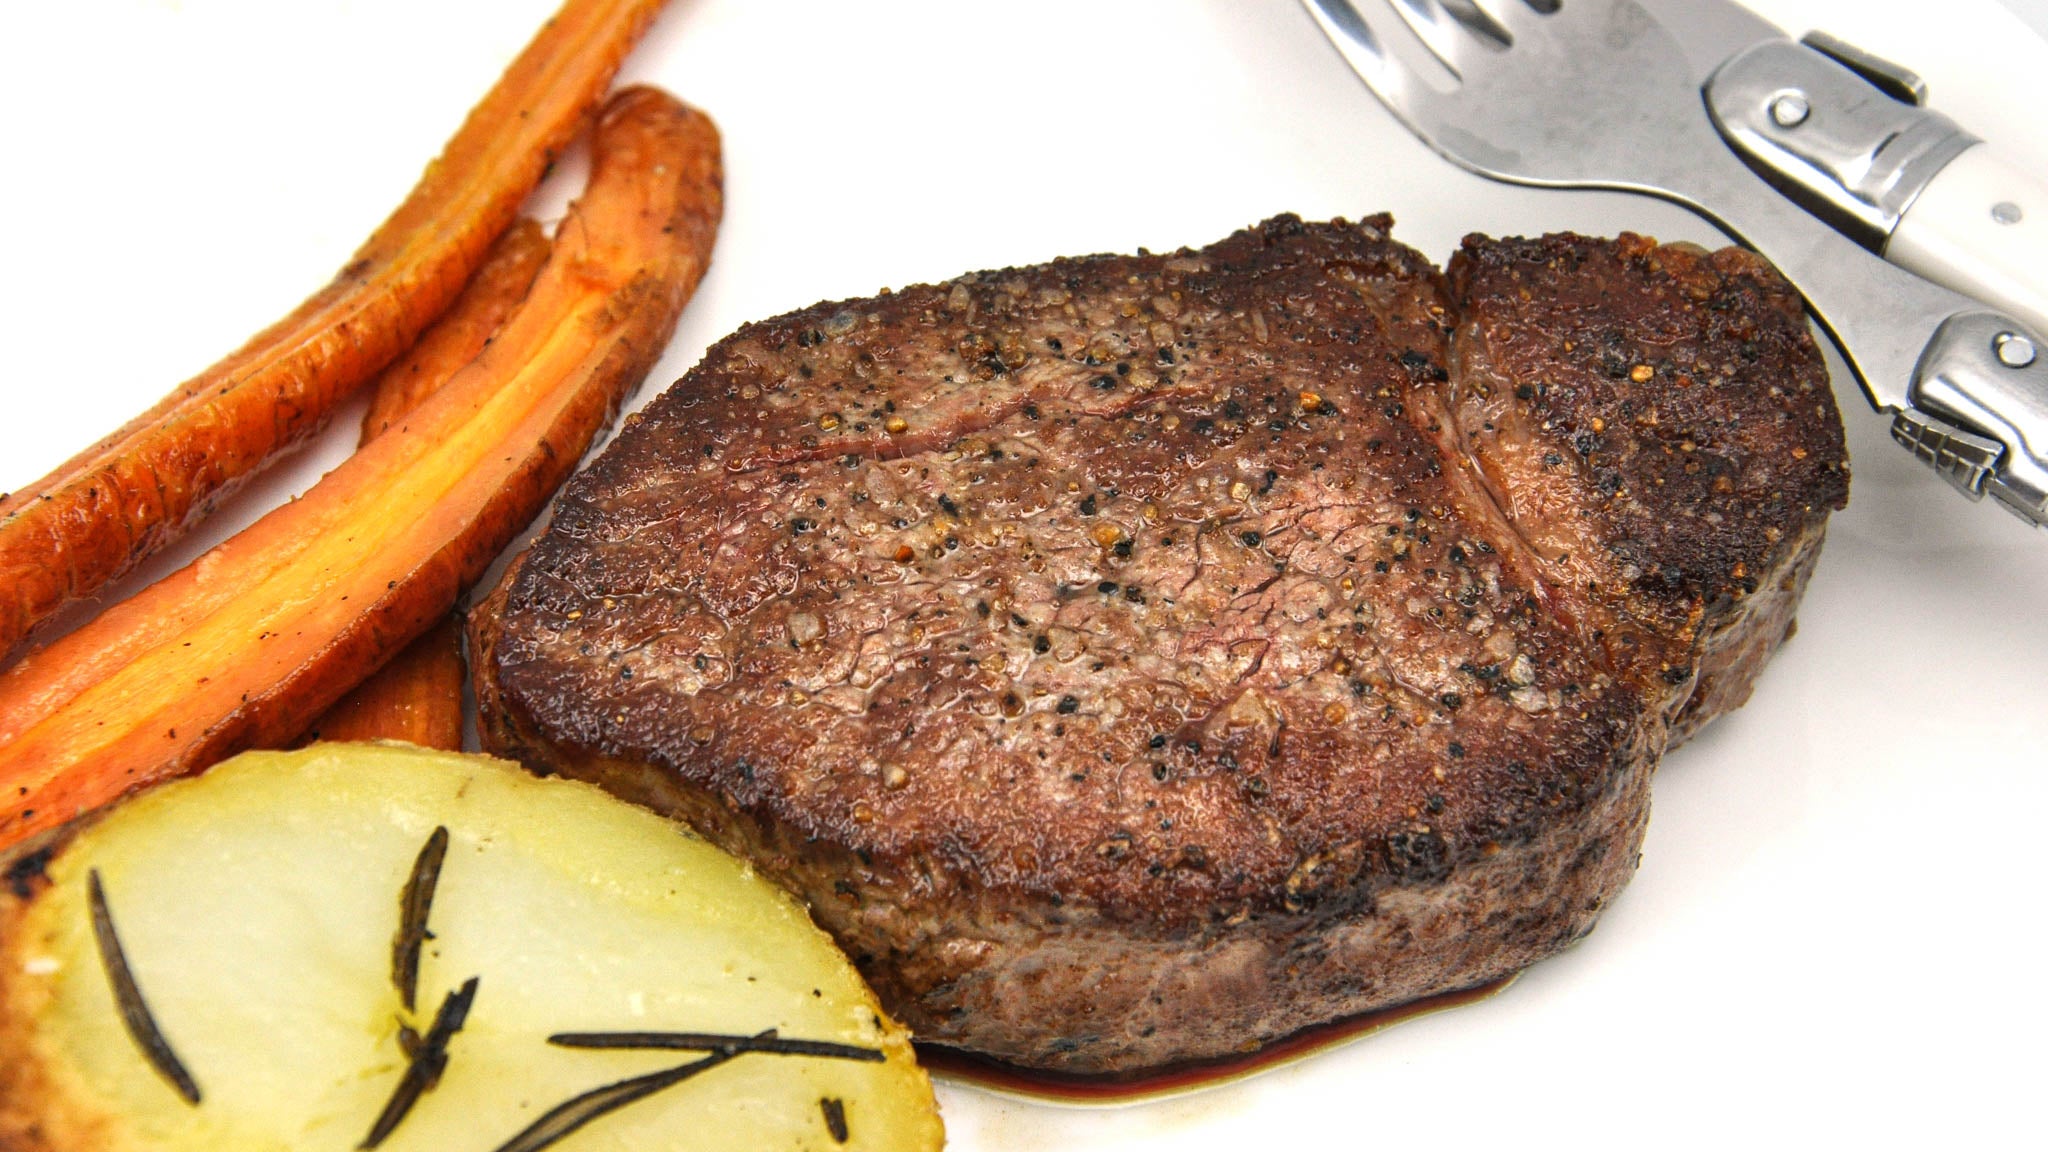 angus beef filet mignon cooked